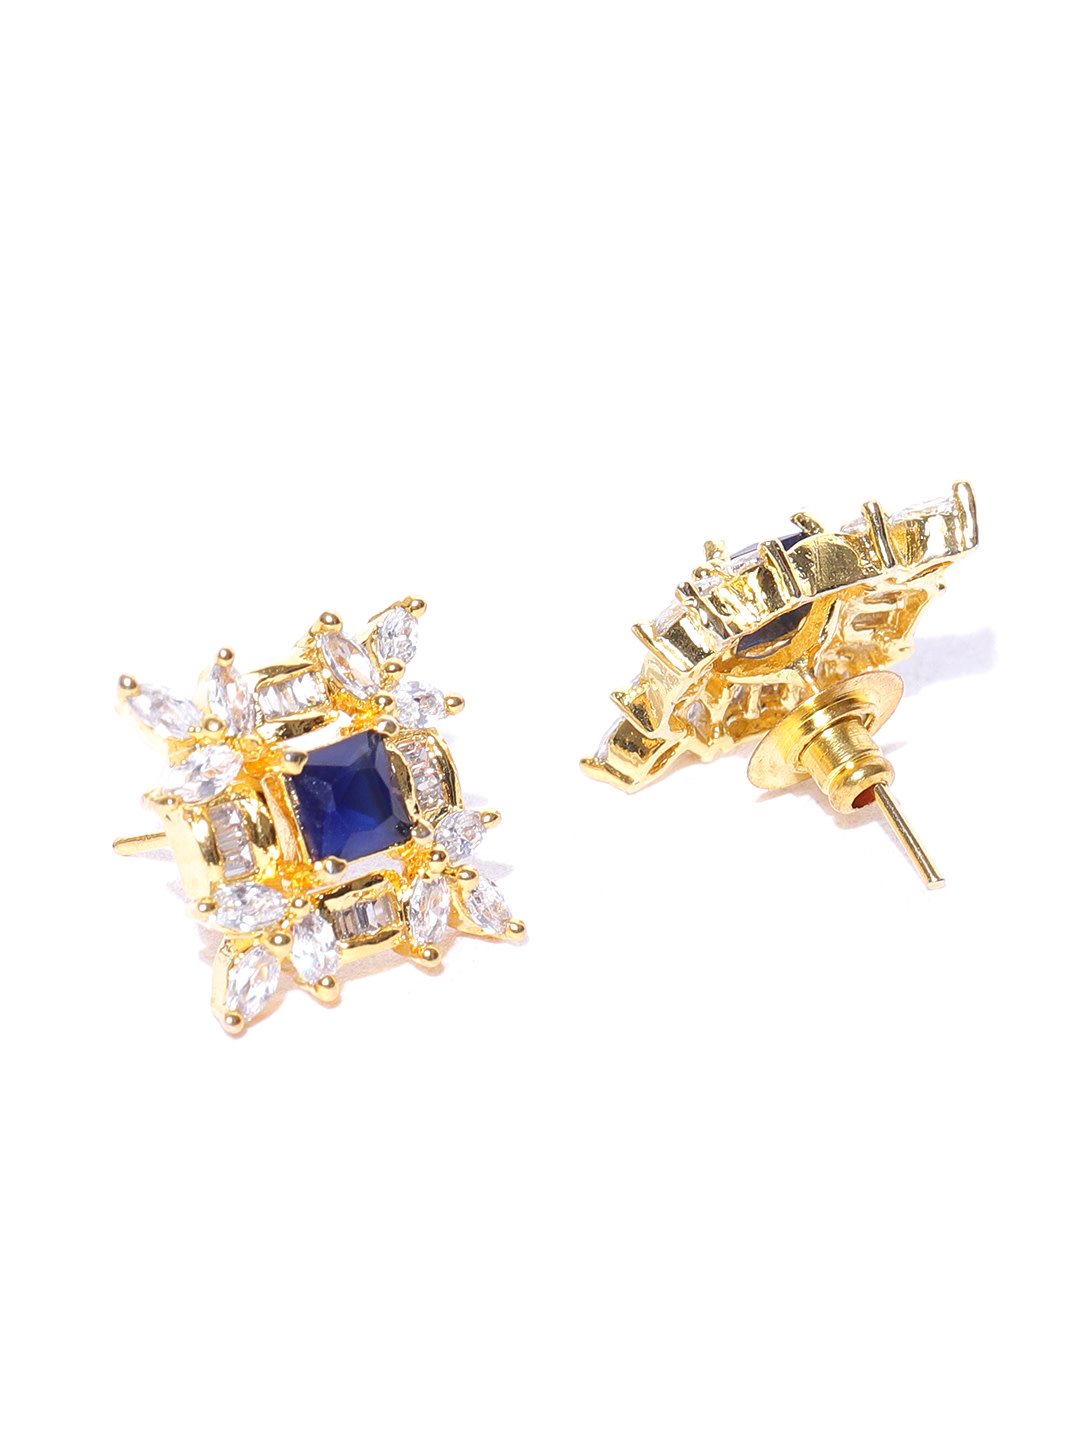 Classic Gold Plated American Diamond Stud Earring For Women And Girls